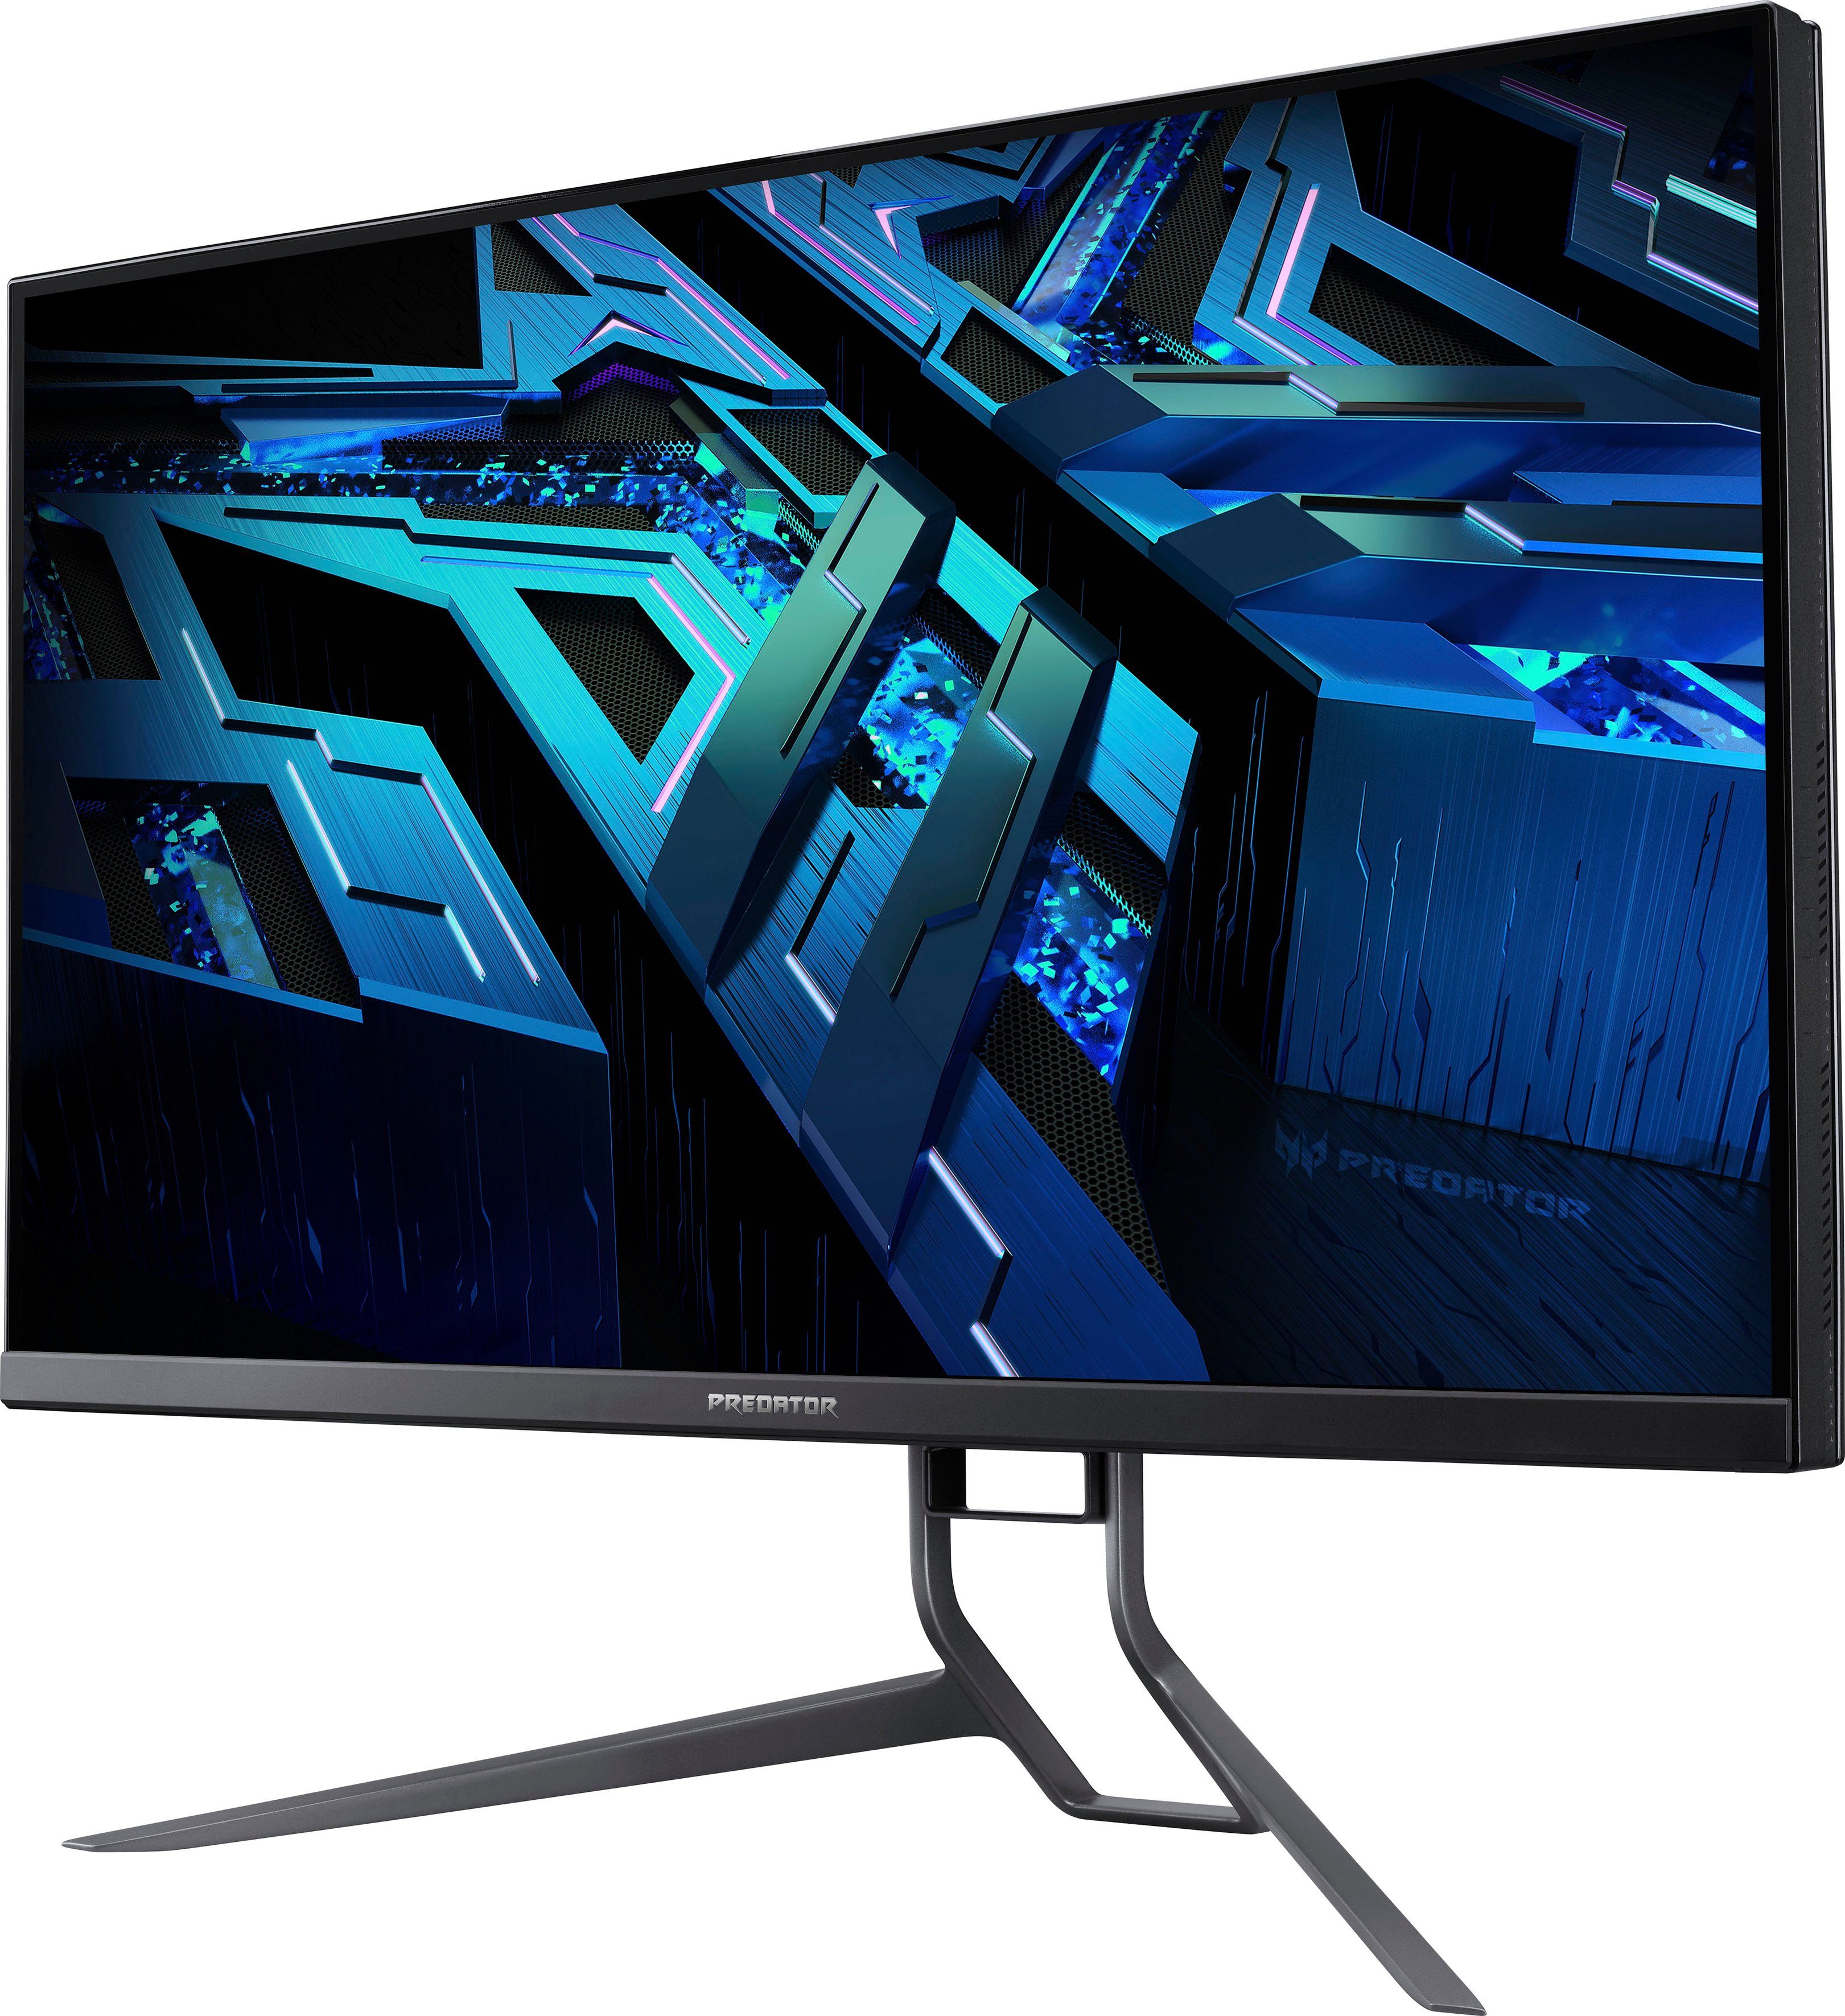 Hz, Quantum Dot miniLED LCD, cm/32 X32 px, (81 Panel, HDR Acer 1000) FP Ultra Gaming-LED-Monitor ms HD, 160 x 4K 2160 0,7 Reaktionszeit, ", 3840 Predator